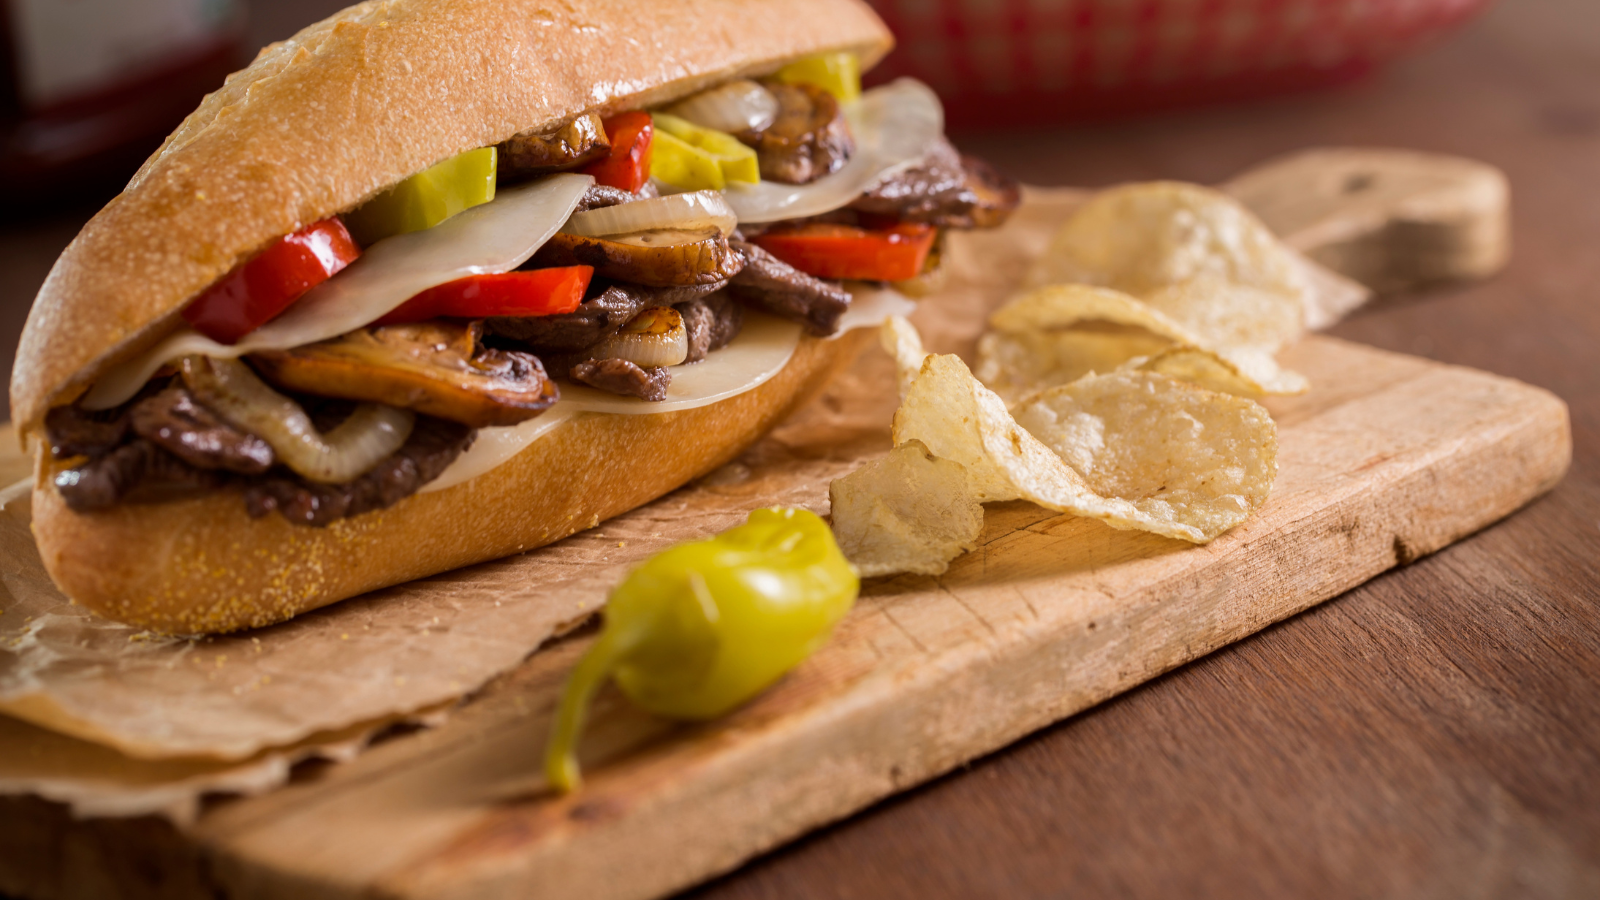 Taste famous Philadelphia dishes such as the Philly Cheesesteak.